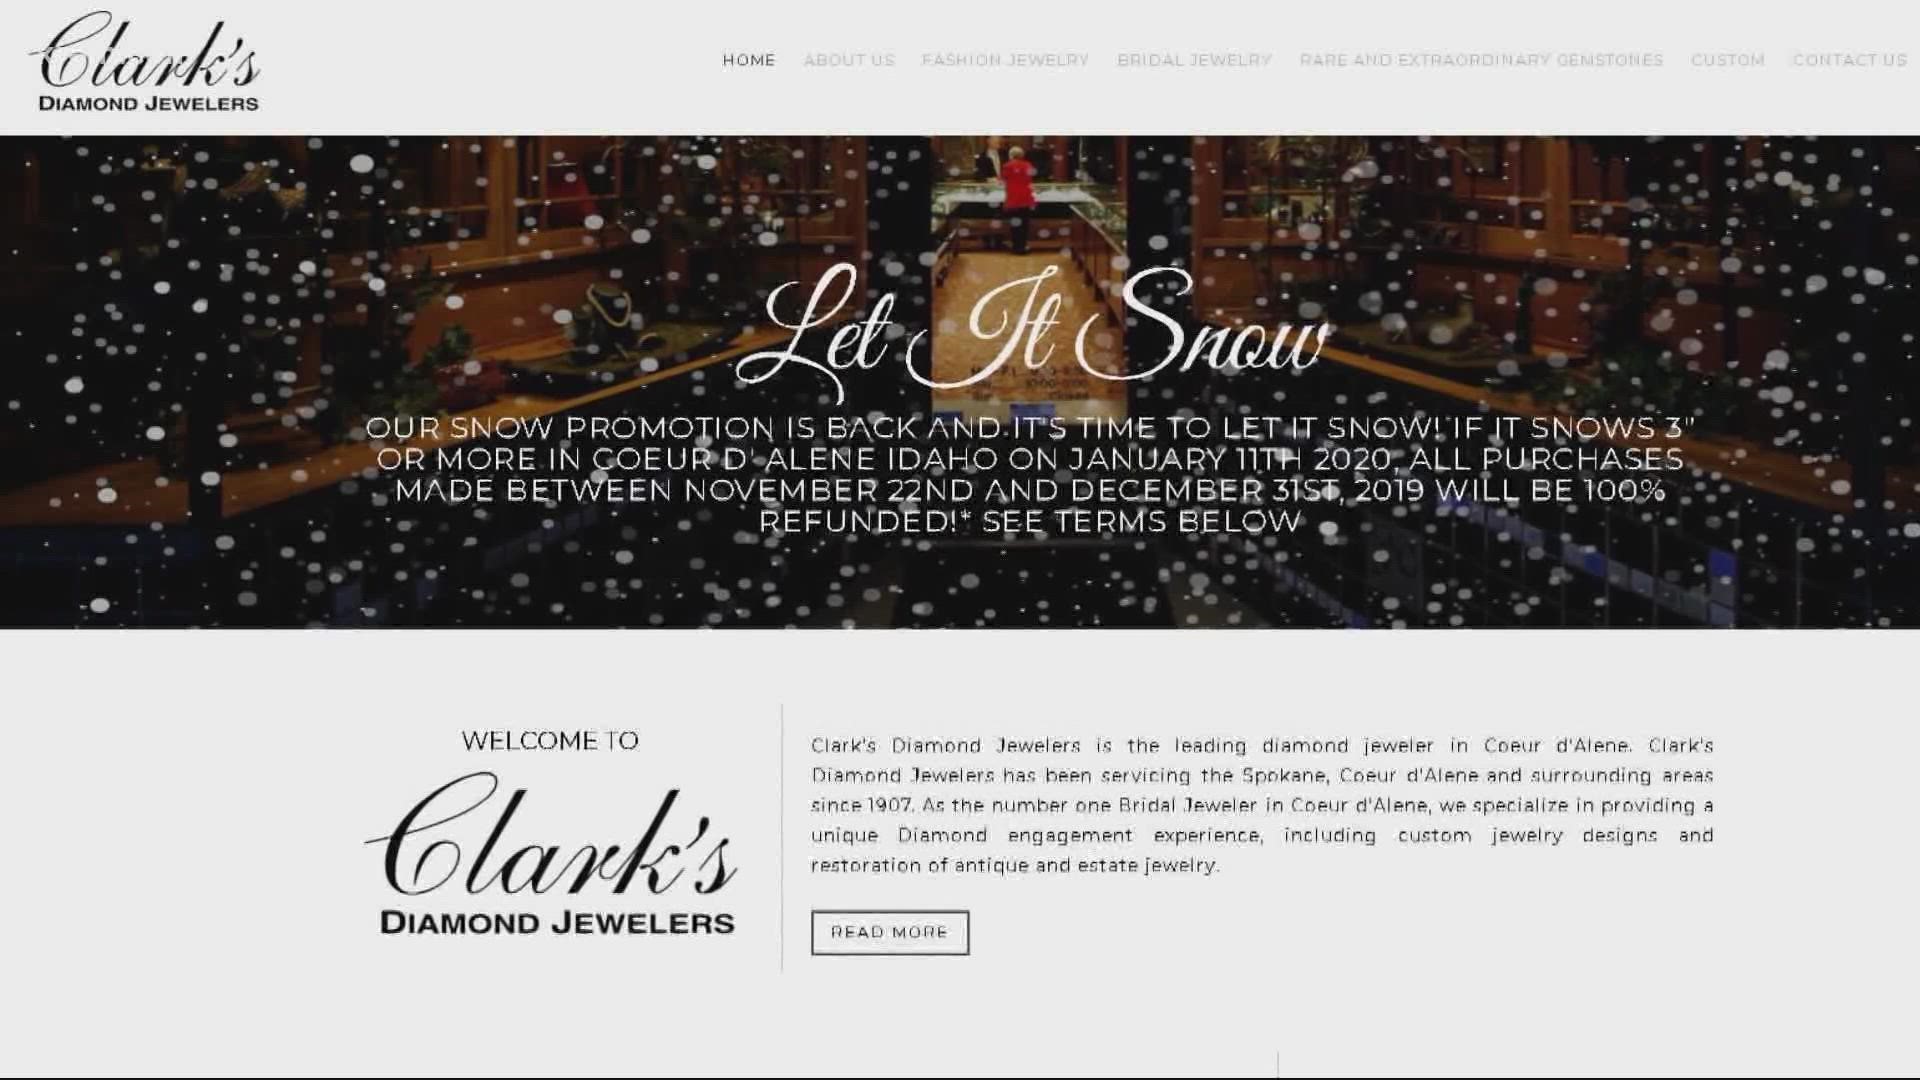 If it snows four inches or more at Spokane International Airport, all purchases made at Clark’s between Nov. 22 and Dec. 31 will be 100% refunded.